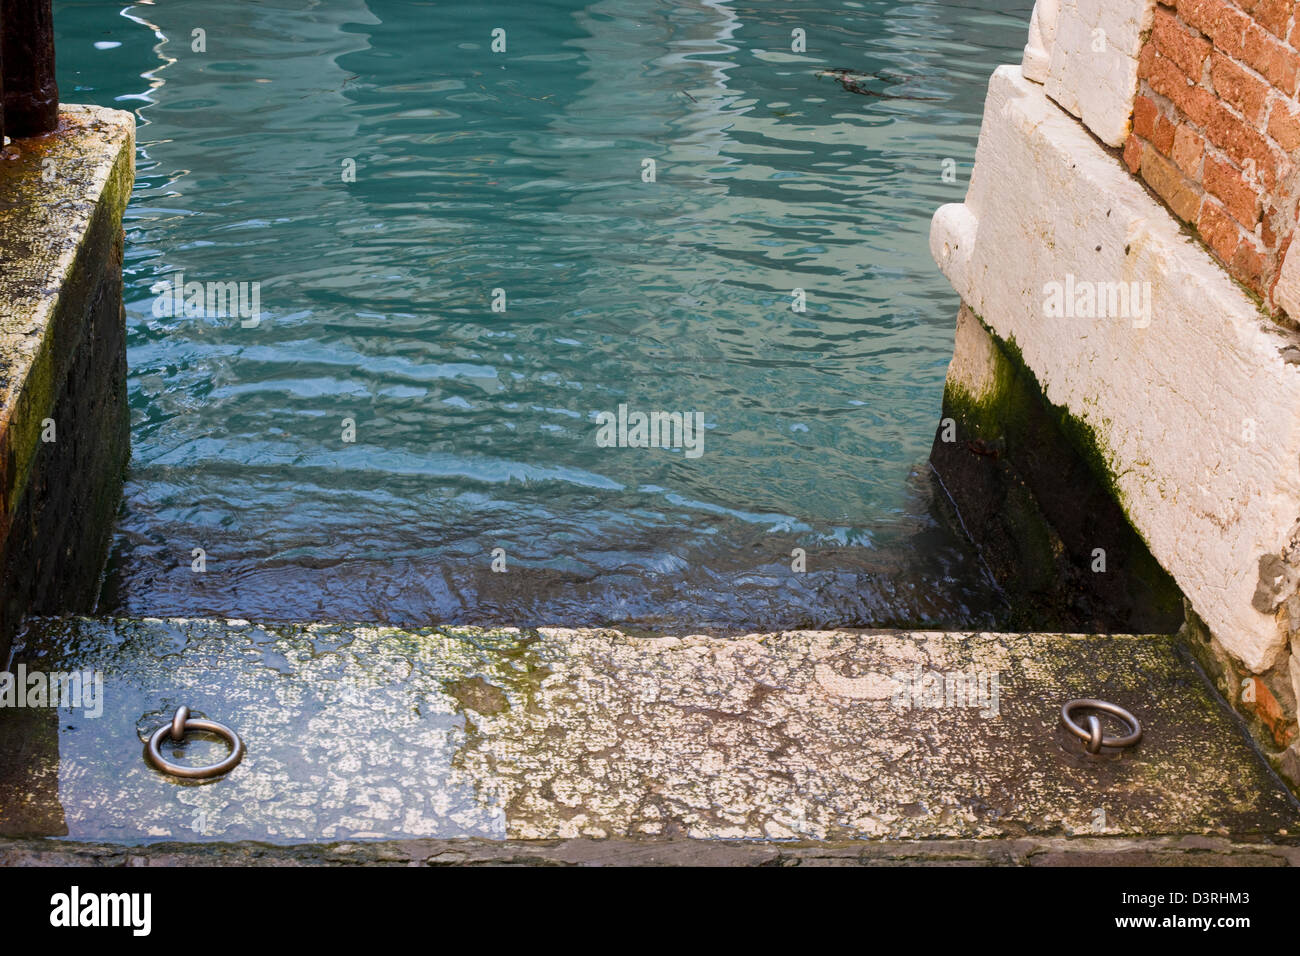 Mooring rings on The Water ways of Venice Italy Stock Photo